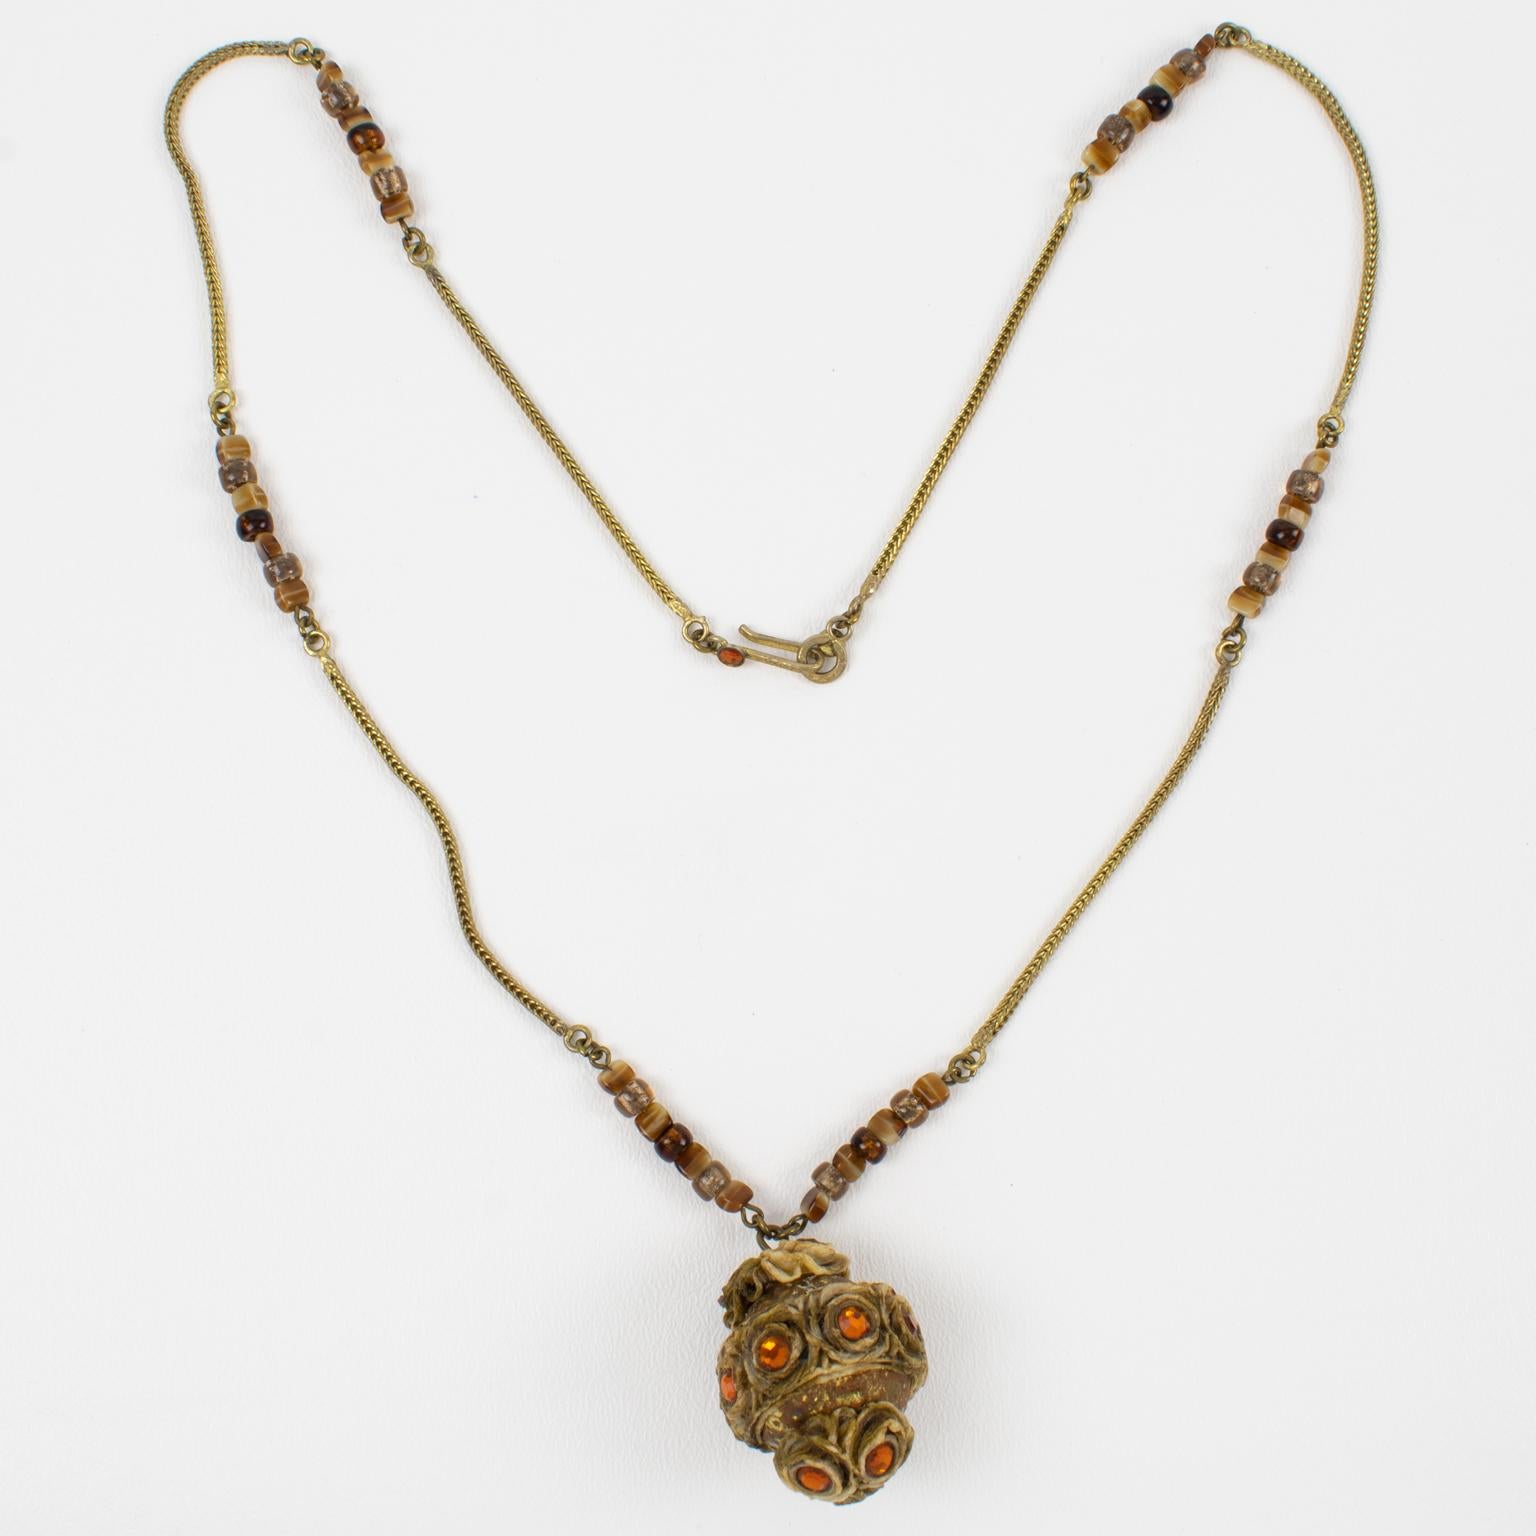 Medieval Henry Perichon Serpentine Chain Necklace with Jeweled Talosel Pendant For Sale